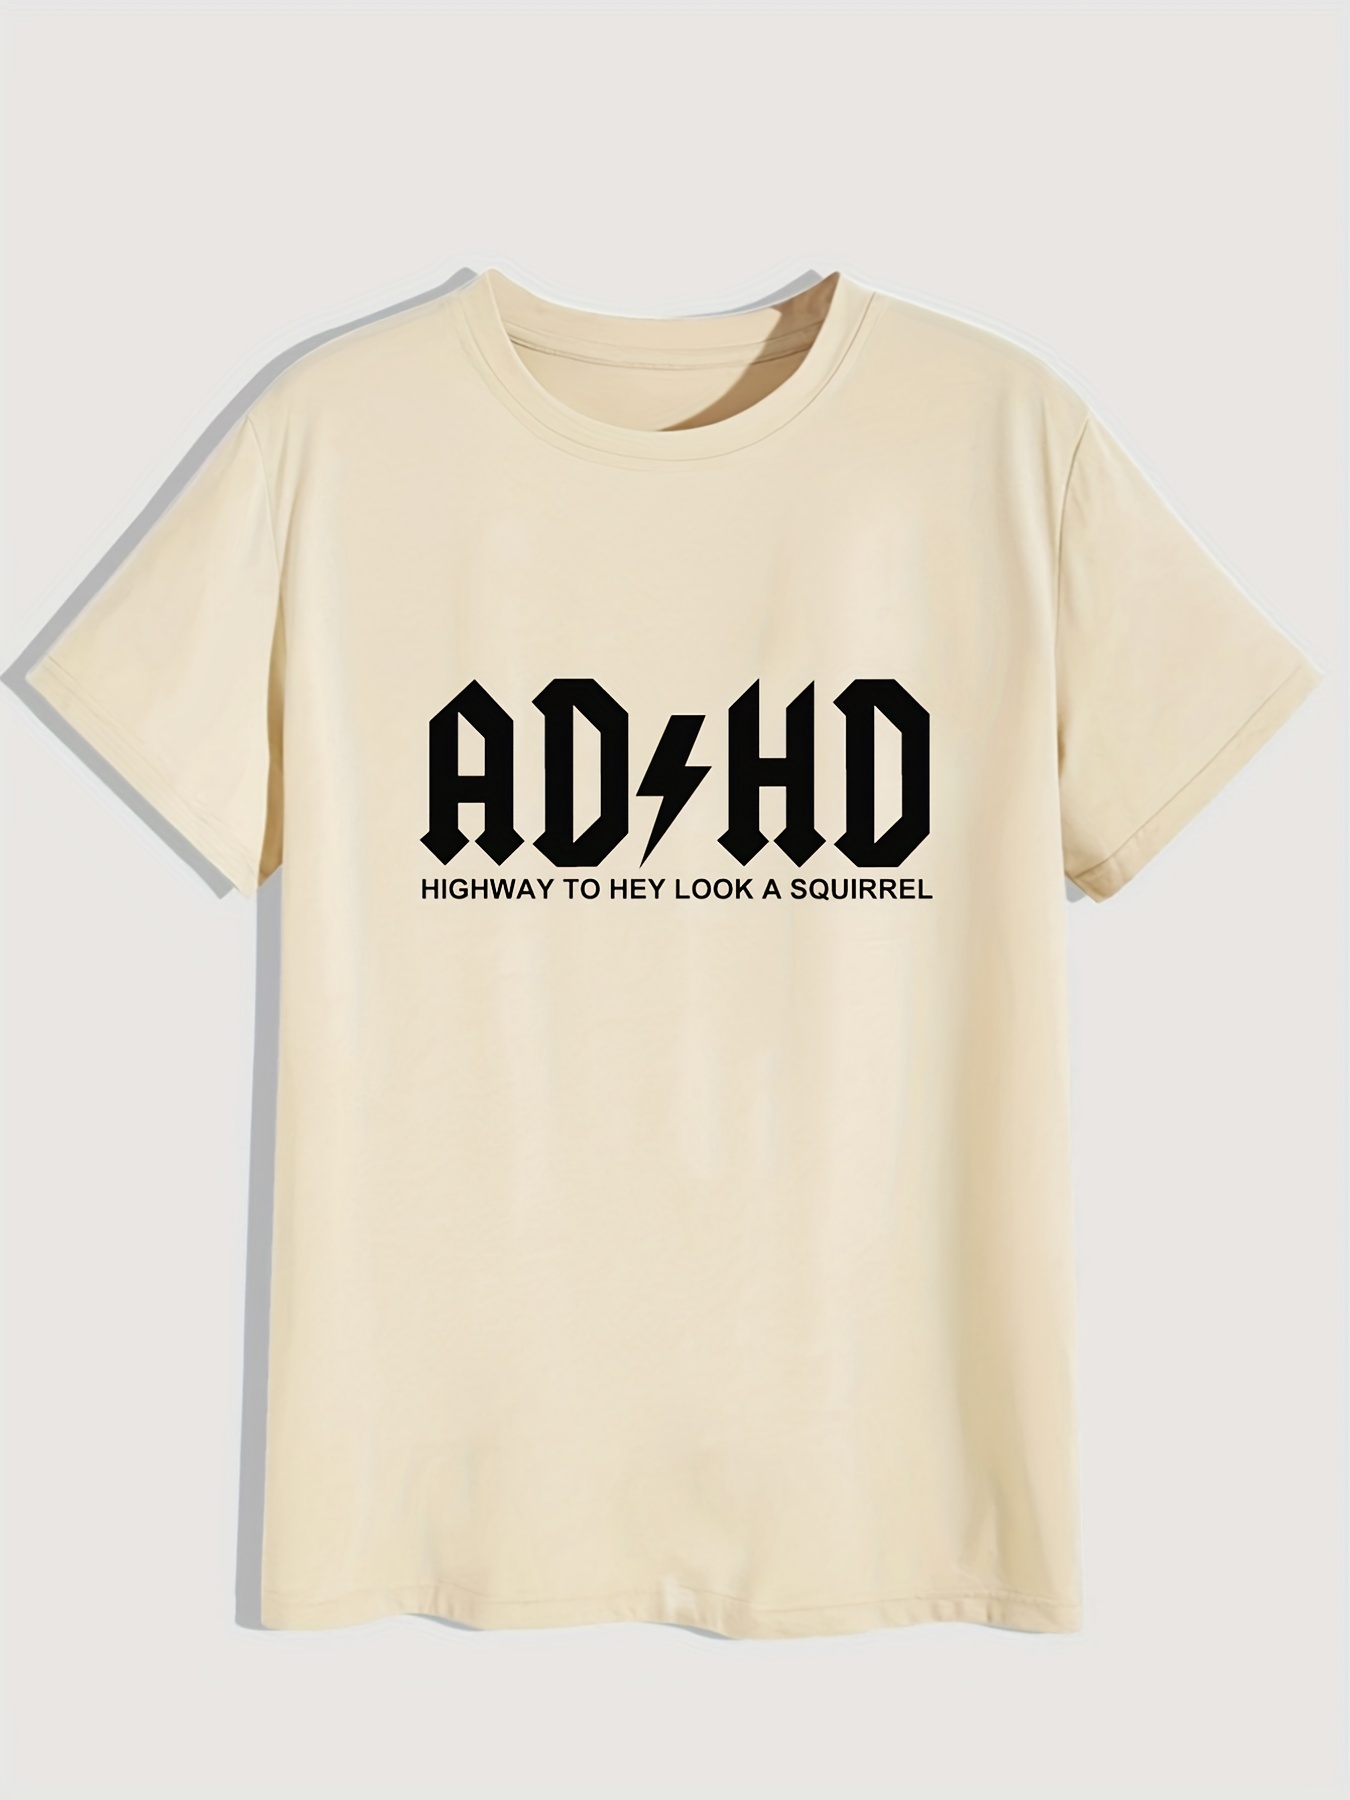 Men's Summer ADHD Graphic Tee - Shop Now at Our Store